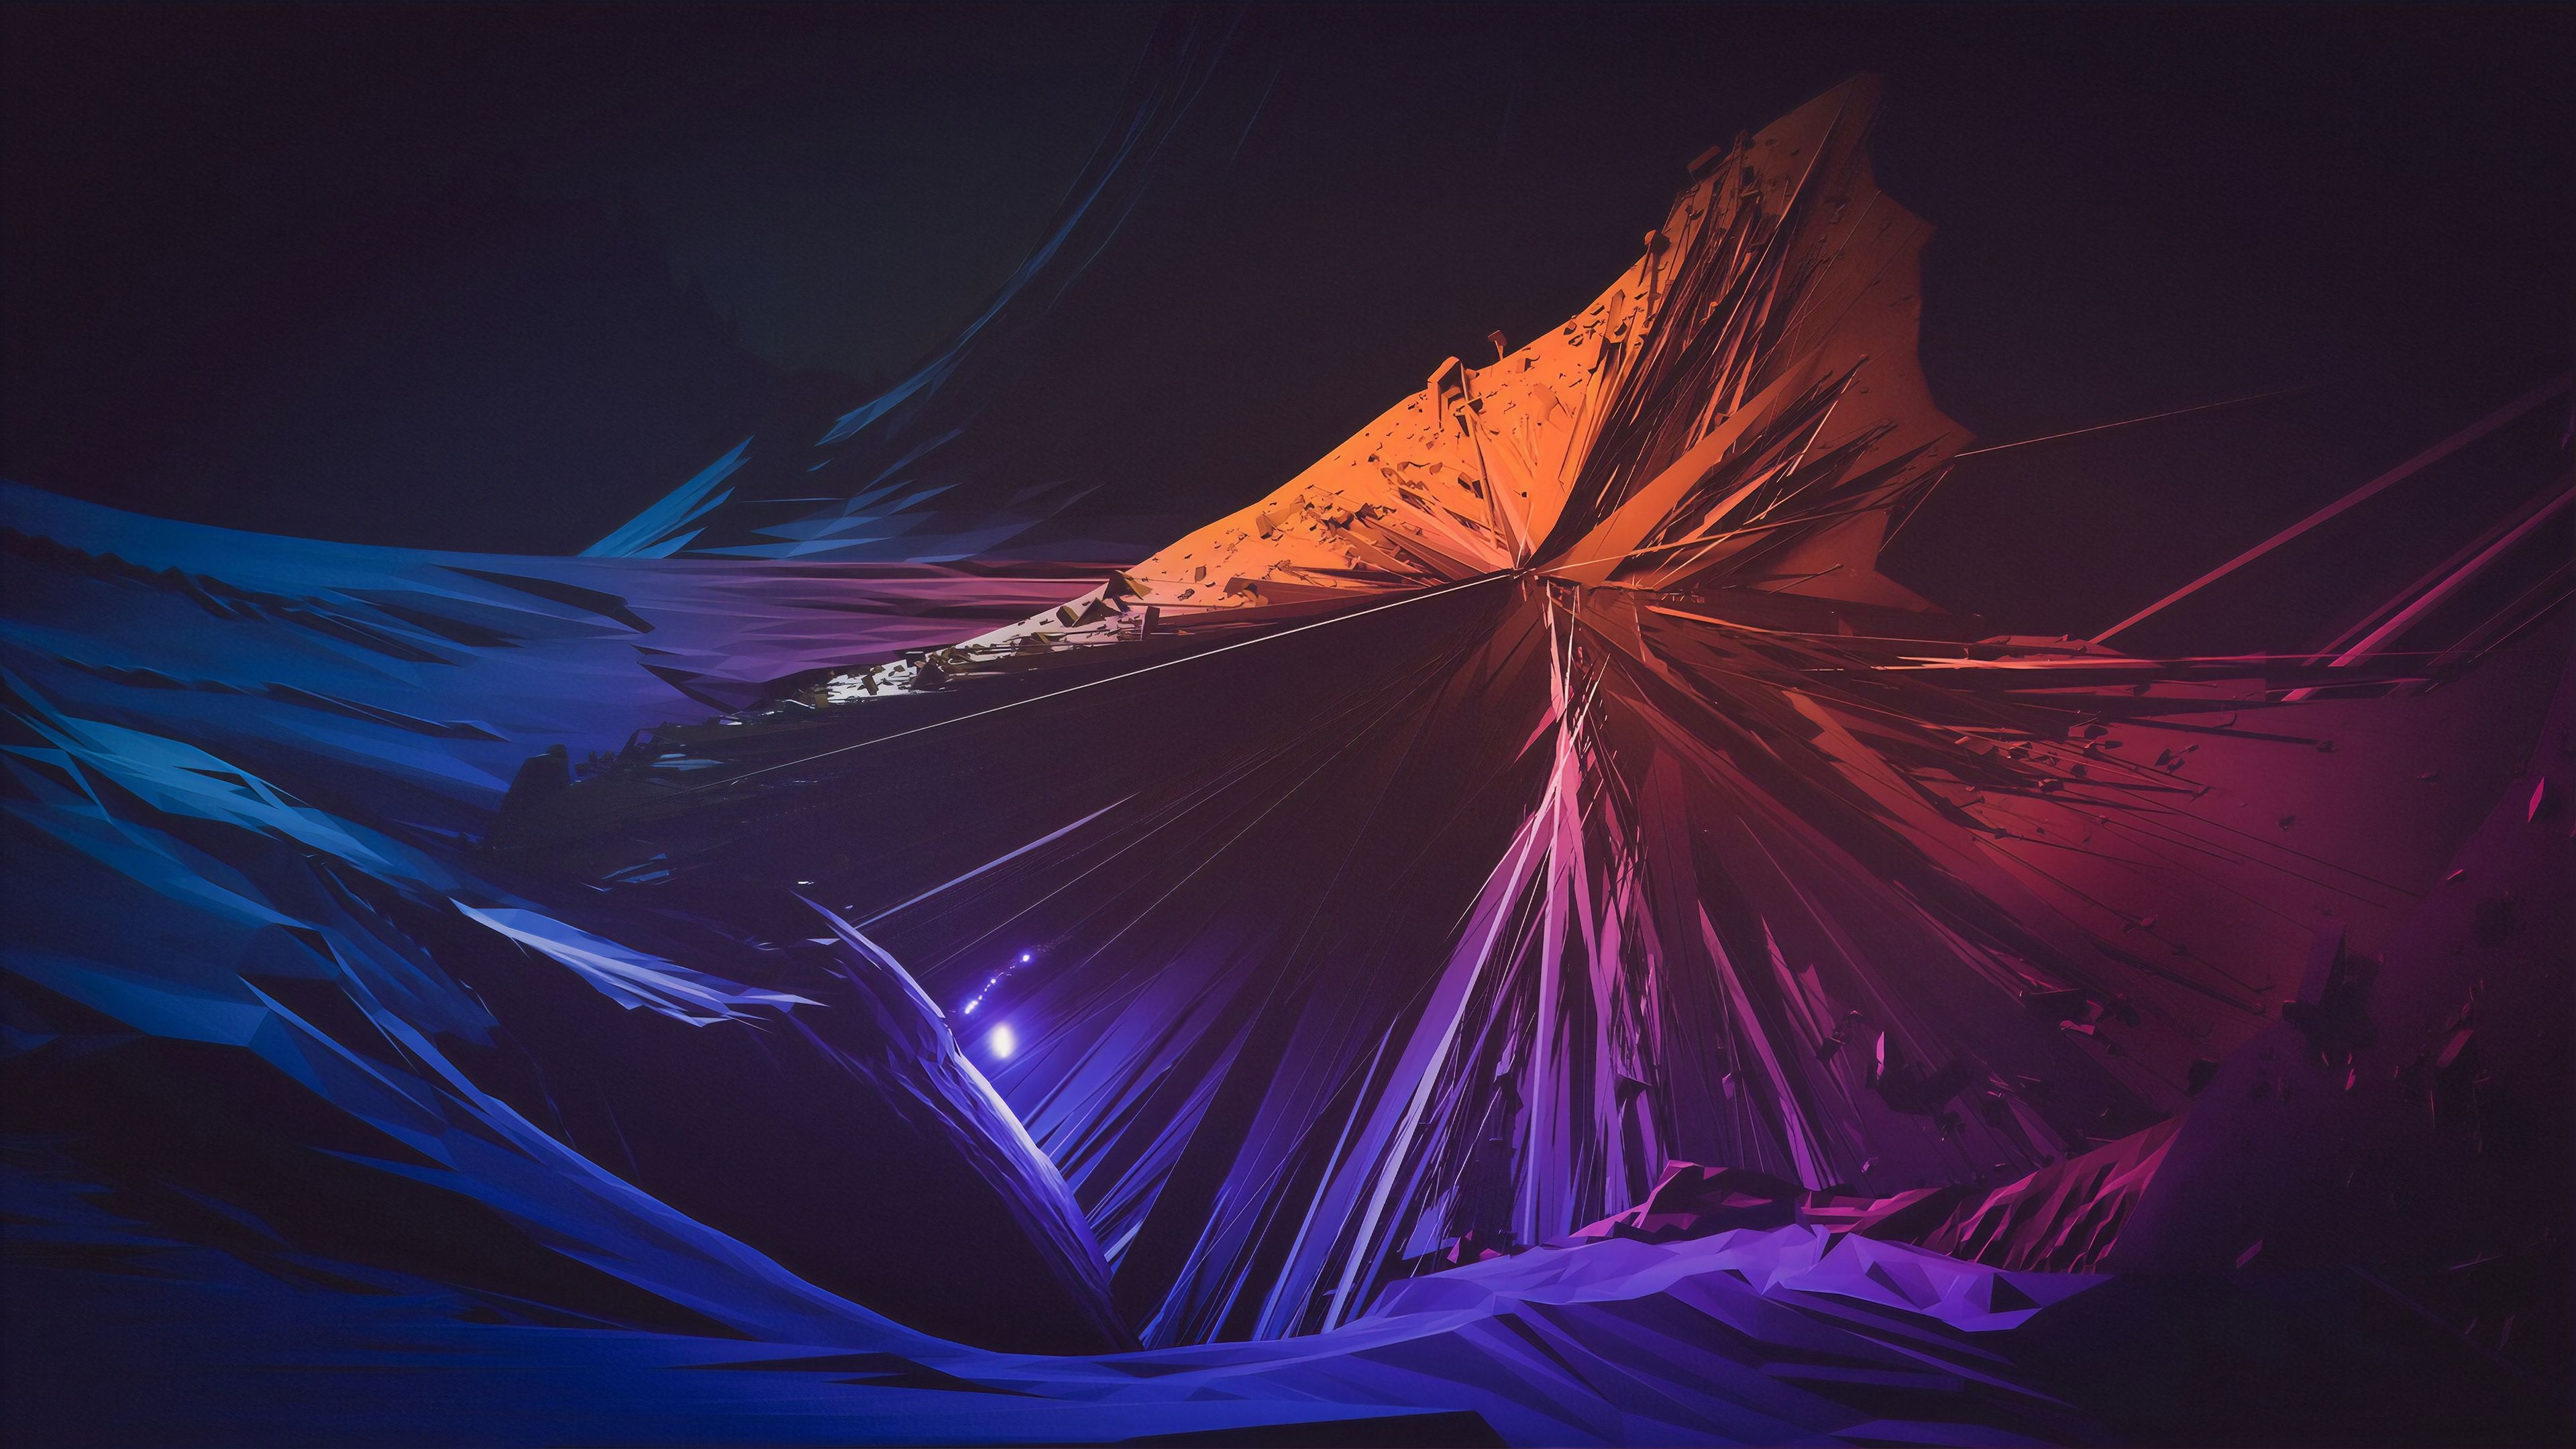 Backdrop: Abstract modern digital art, Gradient, Sharp shapes, Three-dimensional objects. 3840x2160 4K Background.